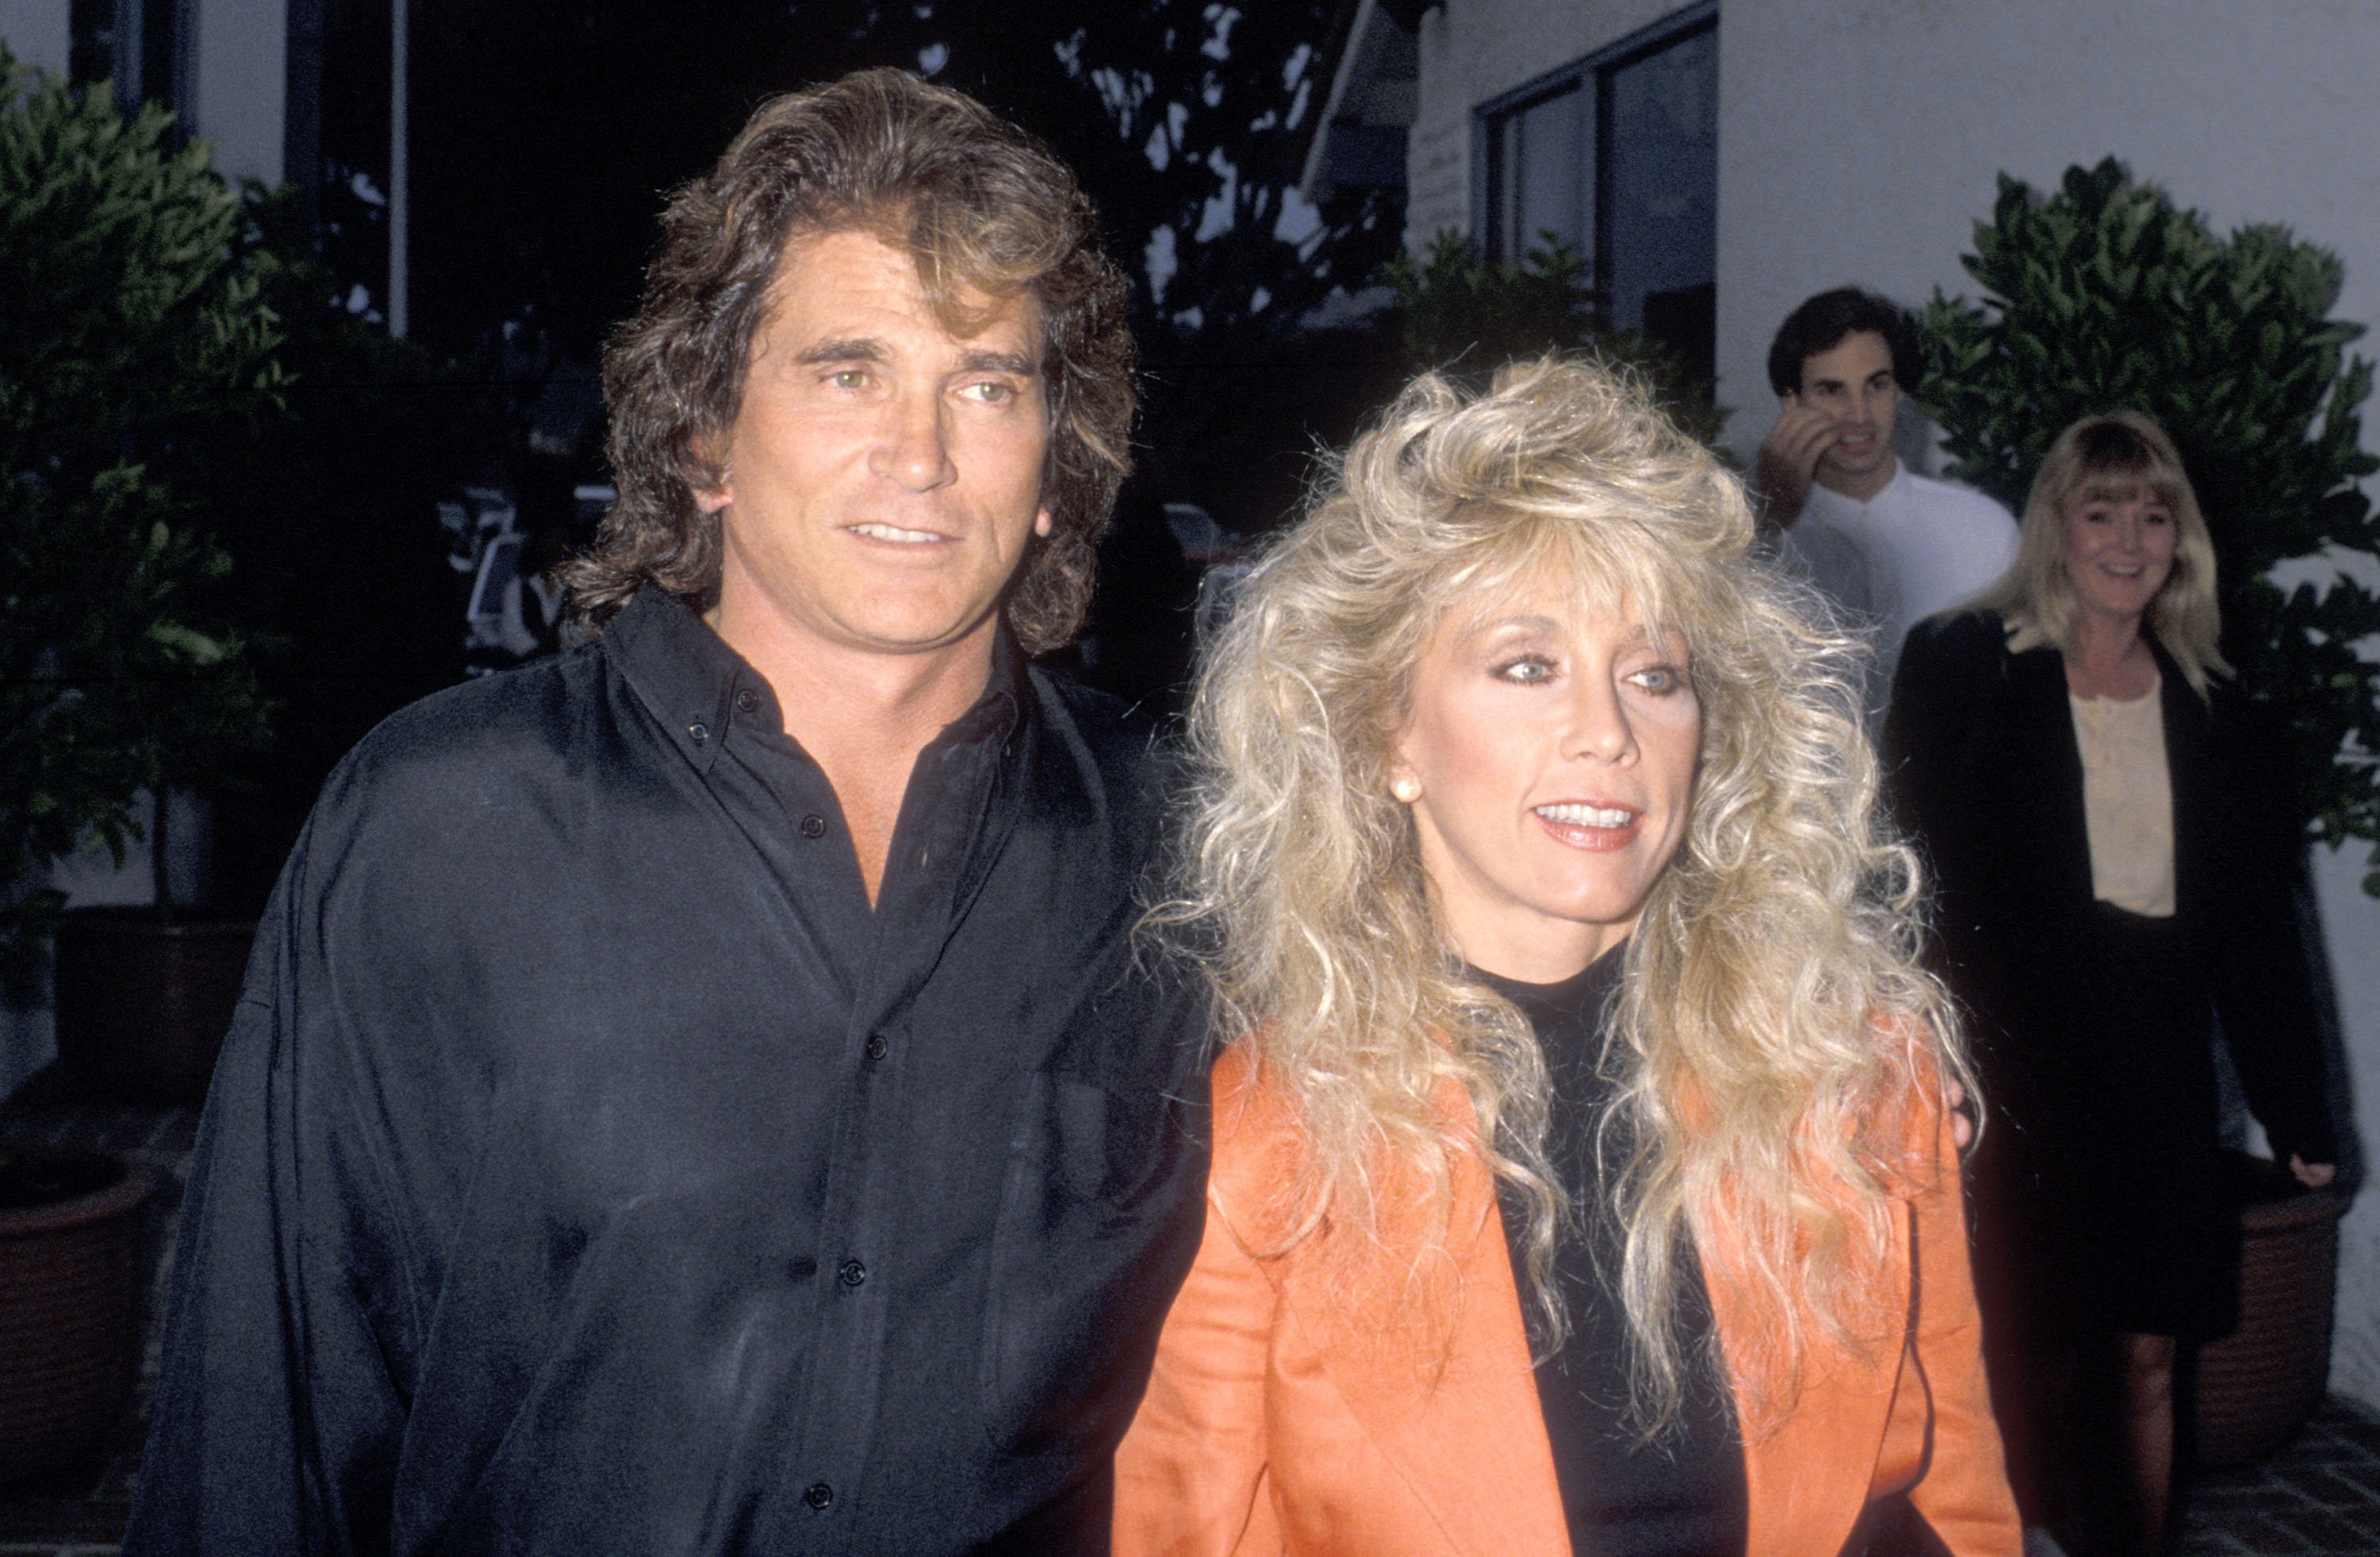 Michael Landon and wife Cindy Landon attend the La Scala Restaurant Grand Opening Celebration on June 2, 1989 in Malibu California | Photo: GettyImages